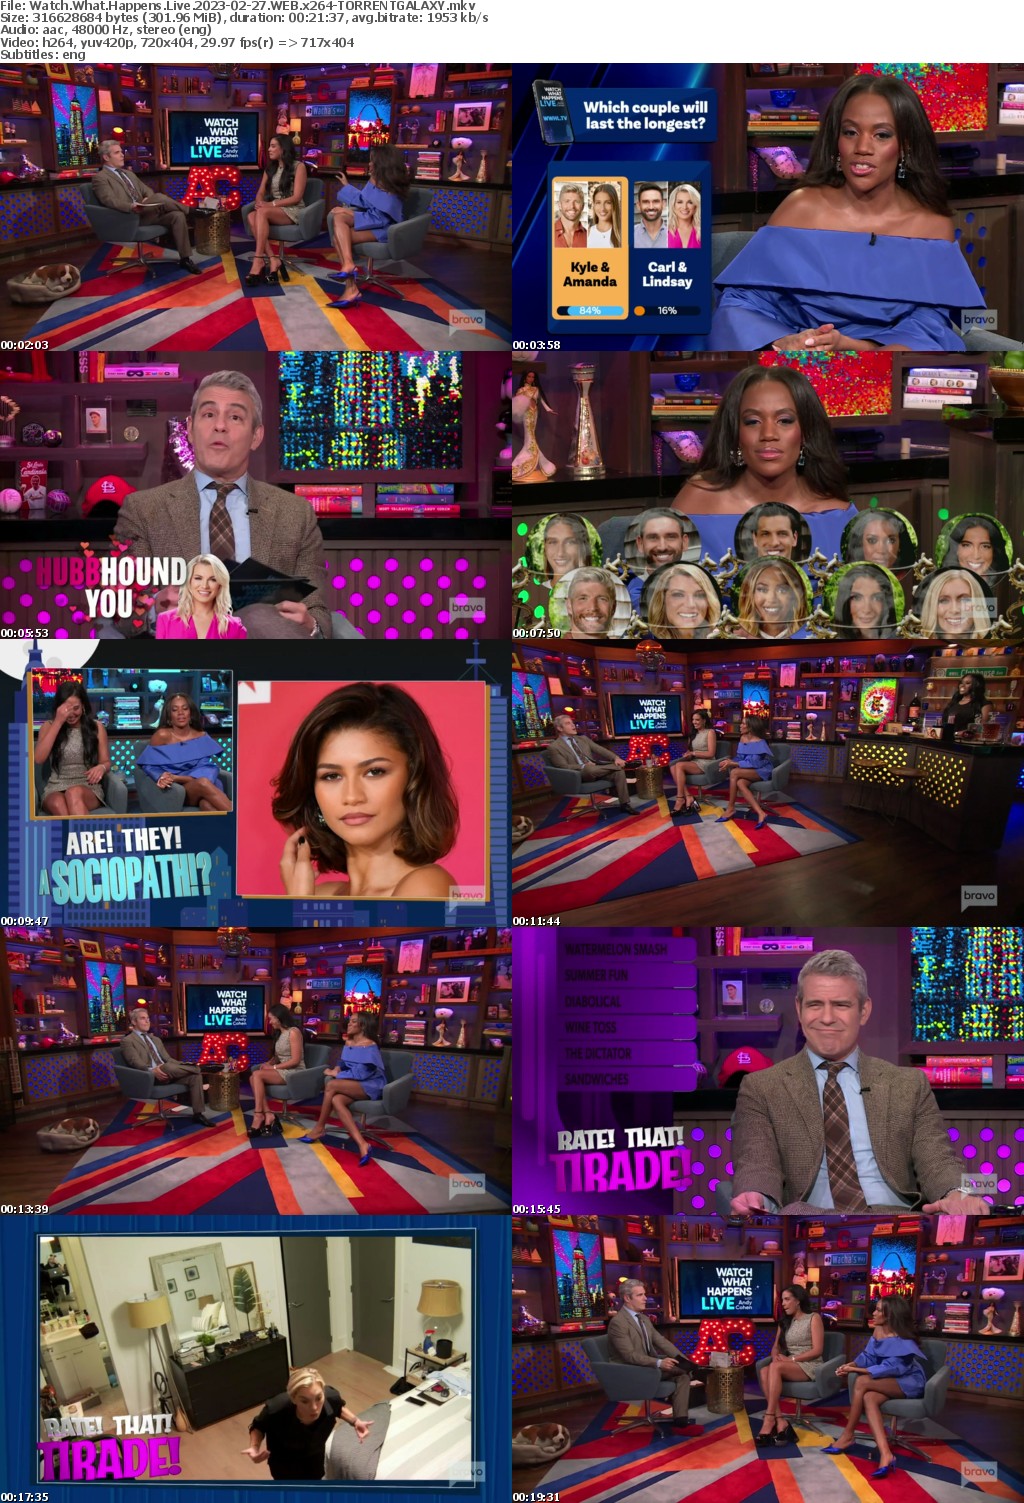 Watch What Happens Live 2023-02-27 WEB x264-GALAXY